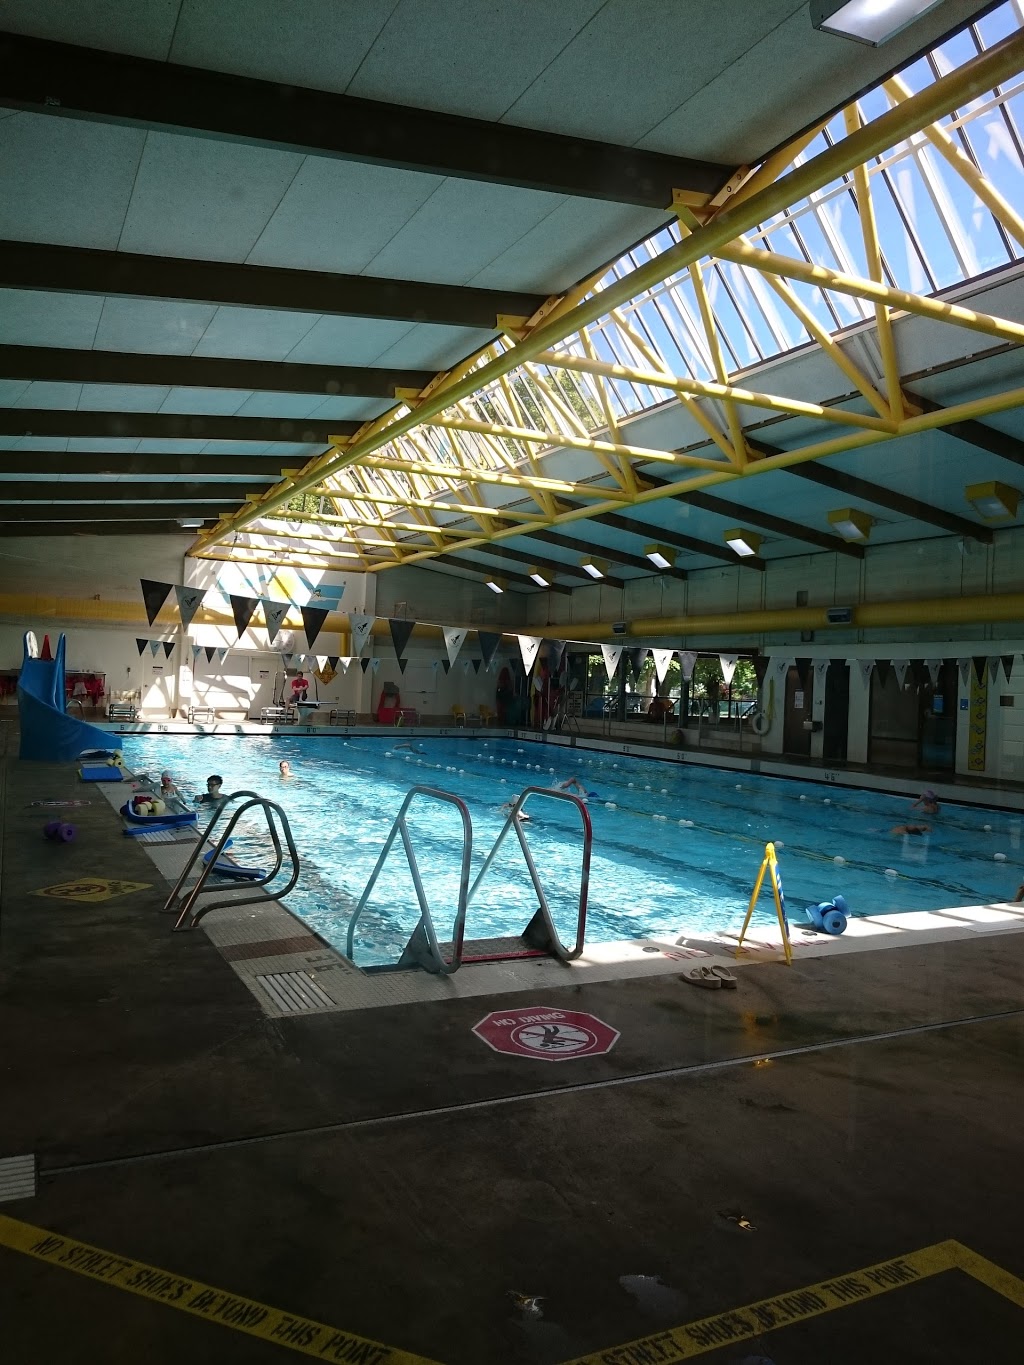 Lord Byng Pool & Fitness Centre | 3990 W 14th Ave, Vancouver, BC V6R 4H2, Canada | Phone: (604) 222-6090